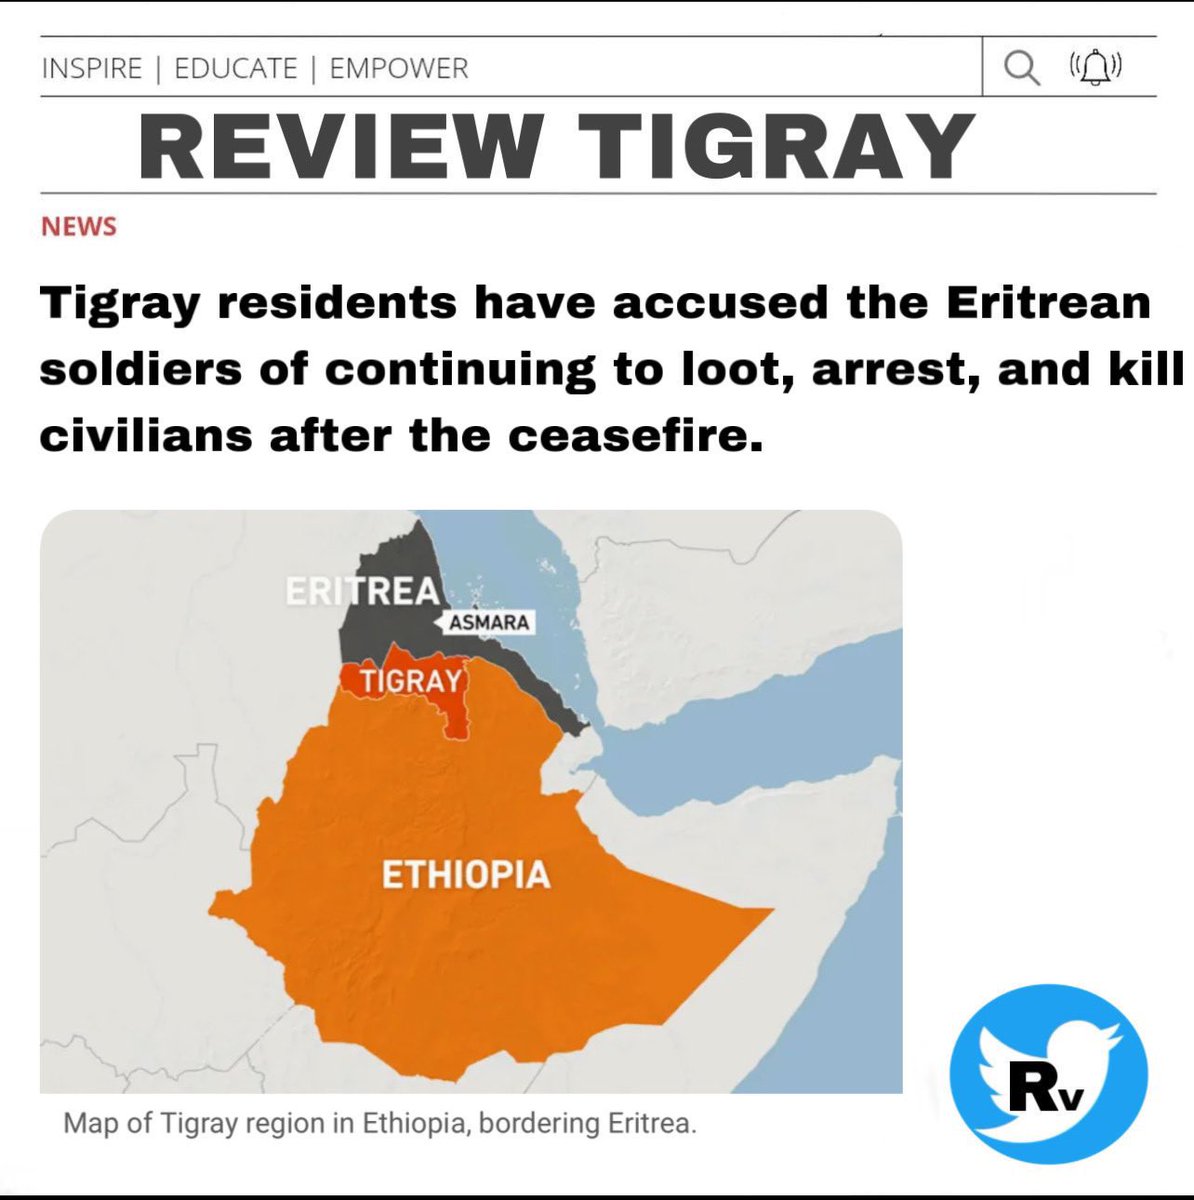 Eritrean forces are still killing, rapeing, & destroying property Tigray civilians. still the #IC has done nothing more than discuss concerns. How many more lives must be lost before action is taken?
#EritreaOutOfTigray #AmharaFanoOutOfTigray @SecBlinken @SecBlinken @JoeBiden